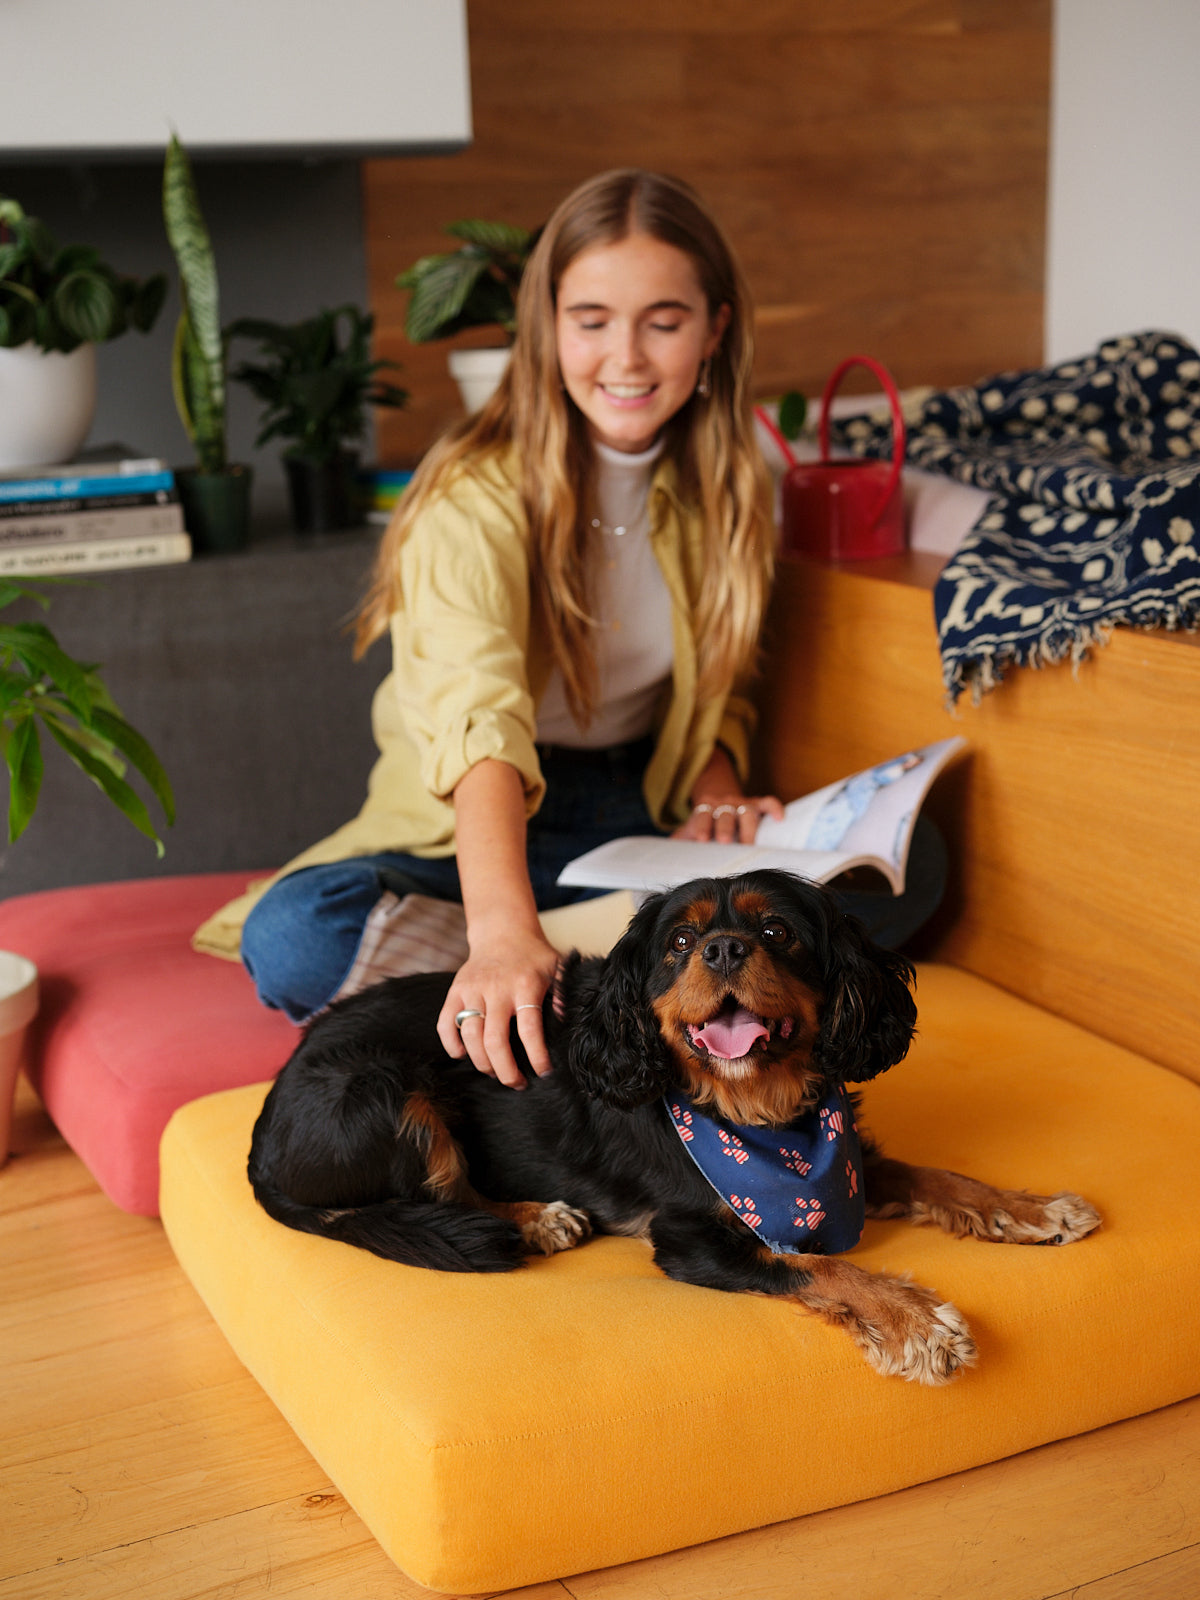 Woman sitting on cushion and petting a dog